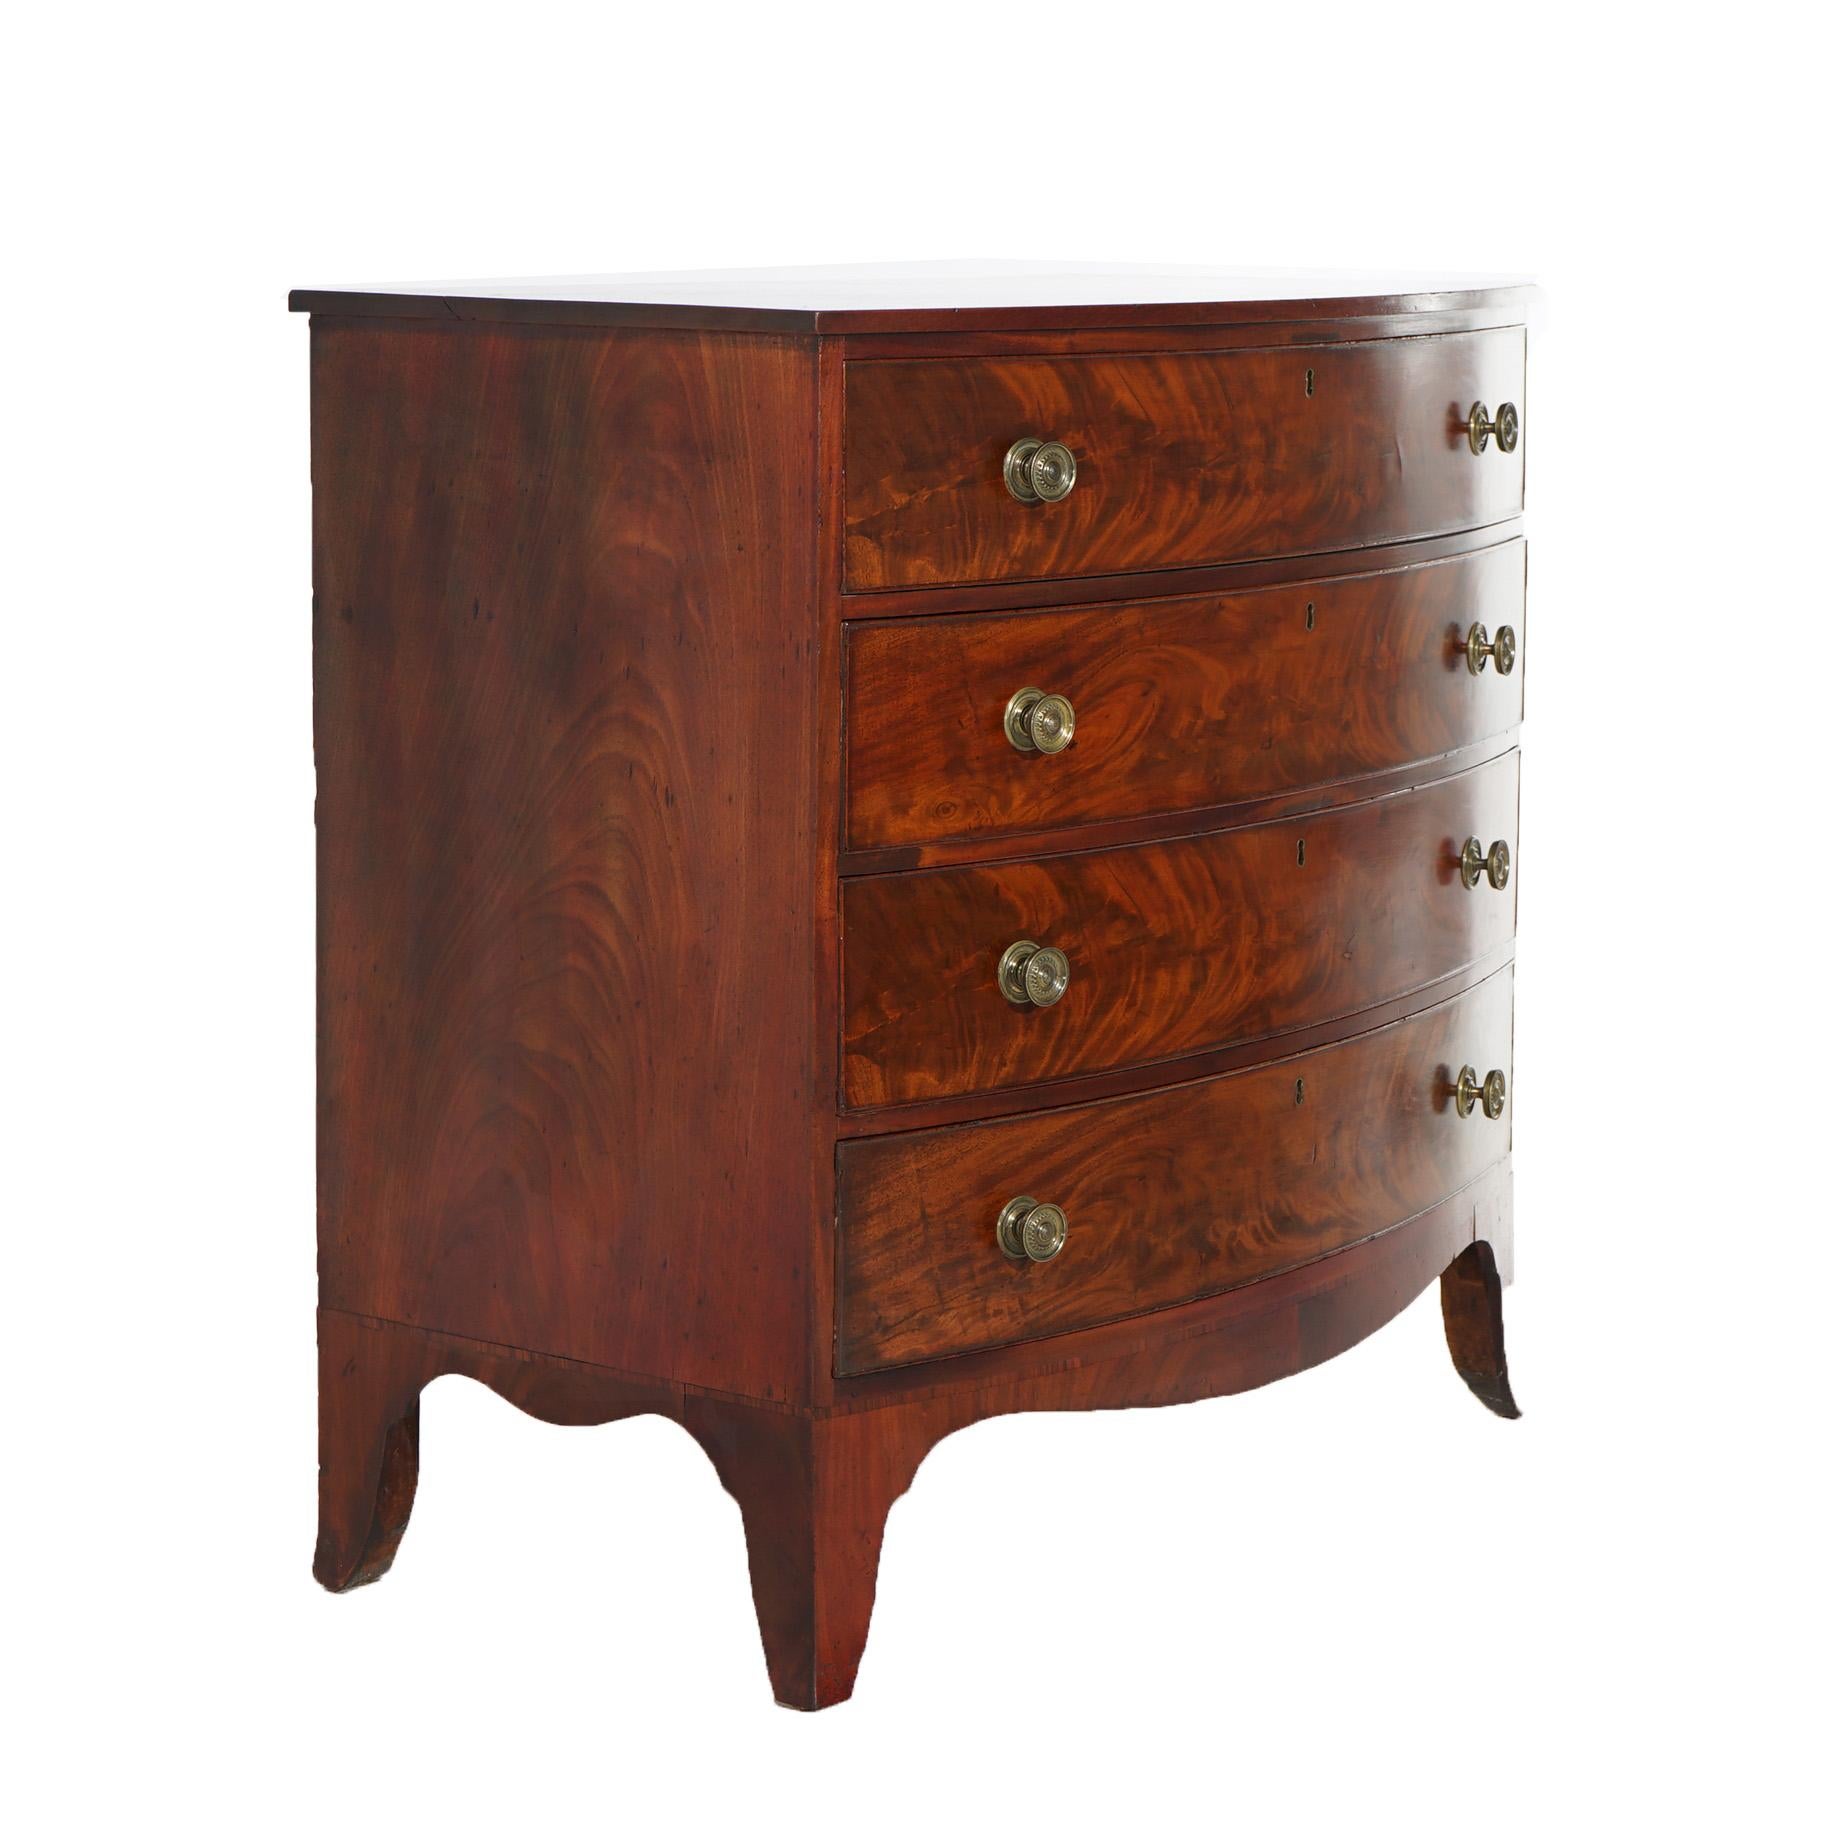 An antique Hepplewhite chest offers flame mahogany construction in bow front form with four long drawers raised on slayed feet, c1830

Measures- 39.25''H x 41''W x 23.25''D